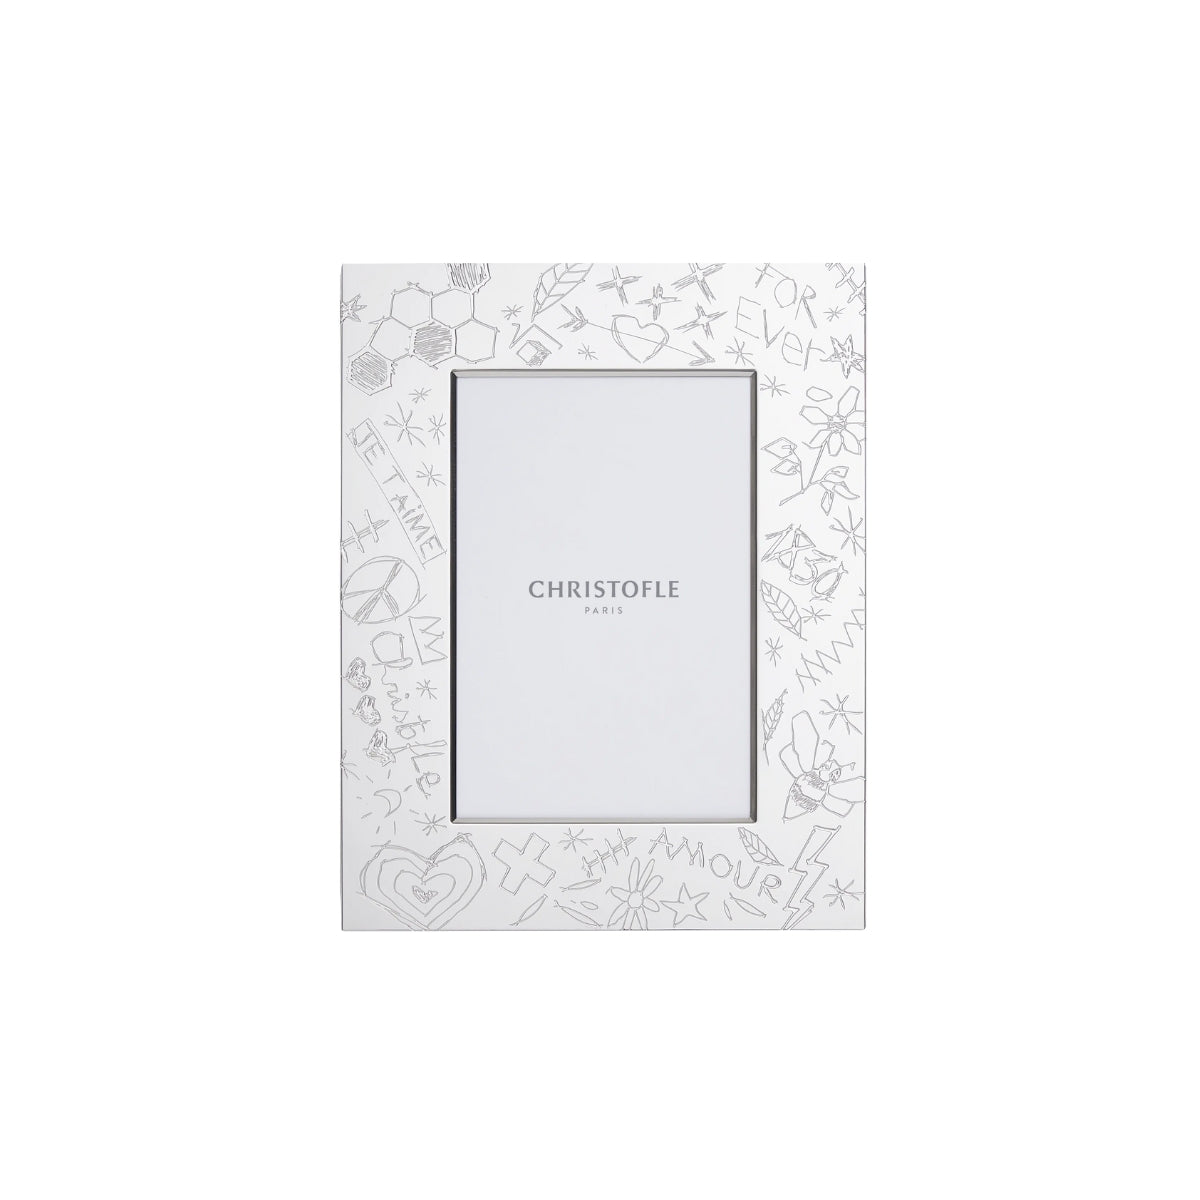 Graffiti Picture Frame Silver Plated